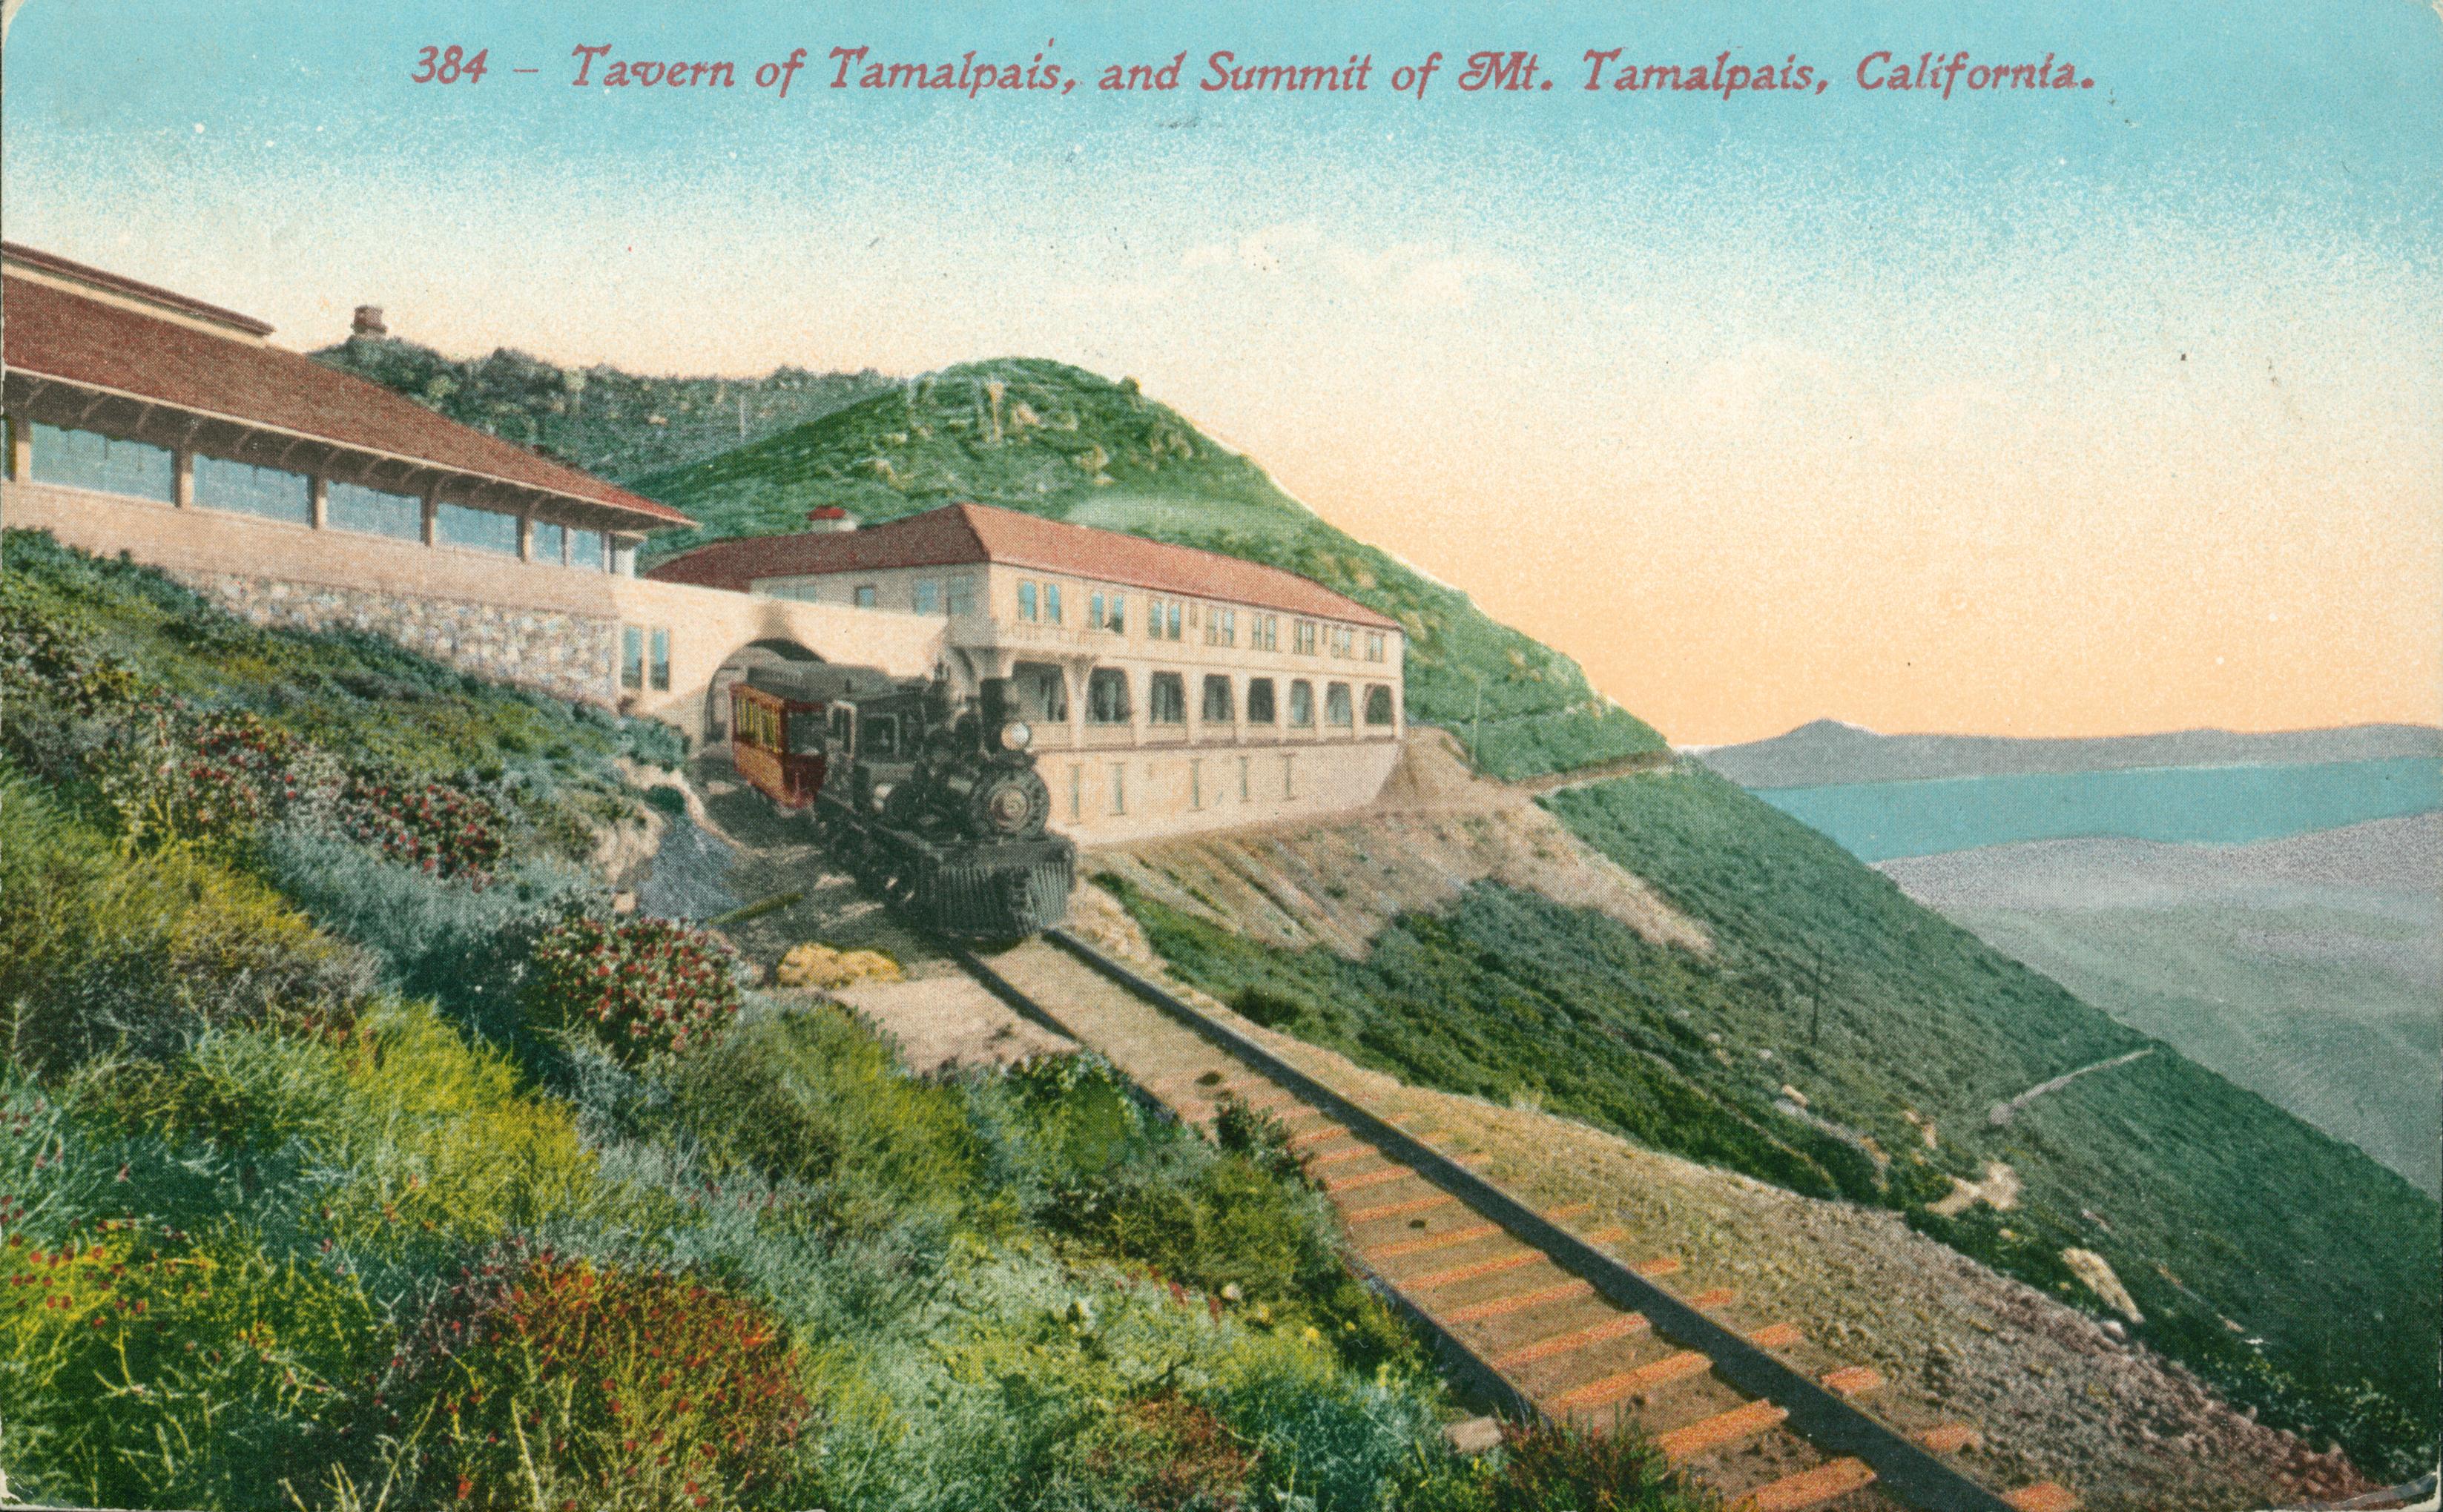 View of Mt. Tamalpais, trees, hills and buildings in background, train and train tracks in foreground